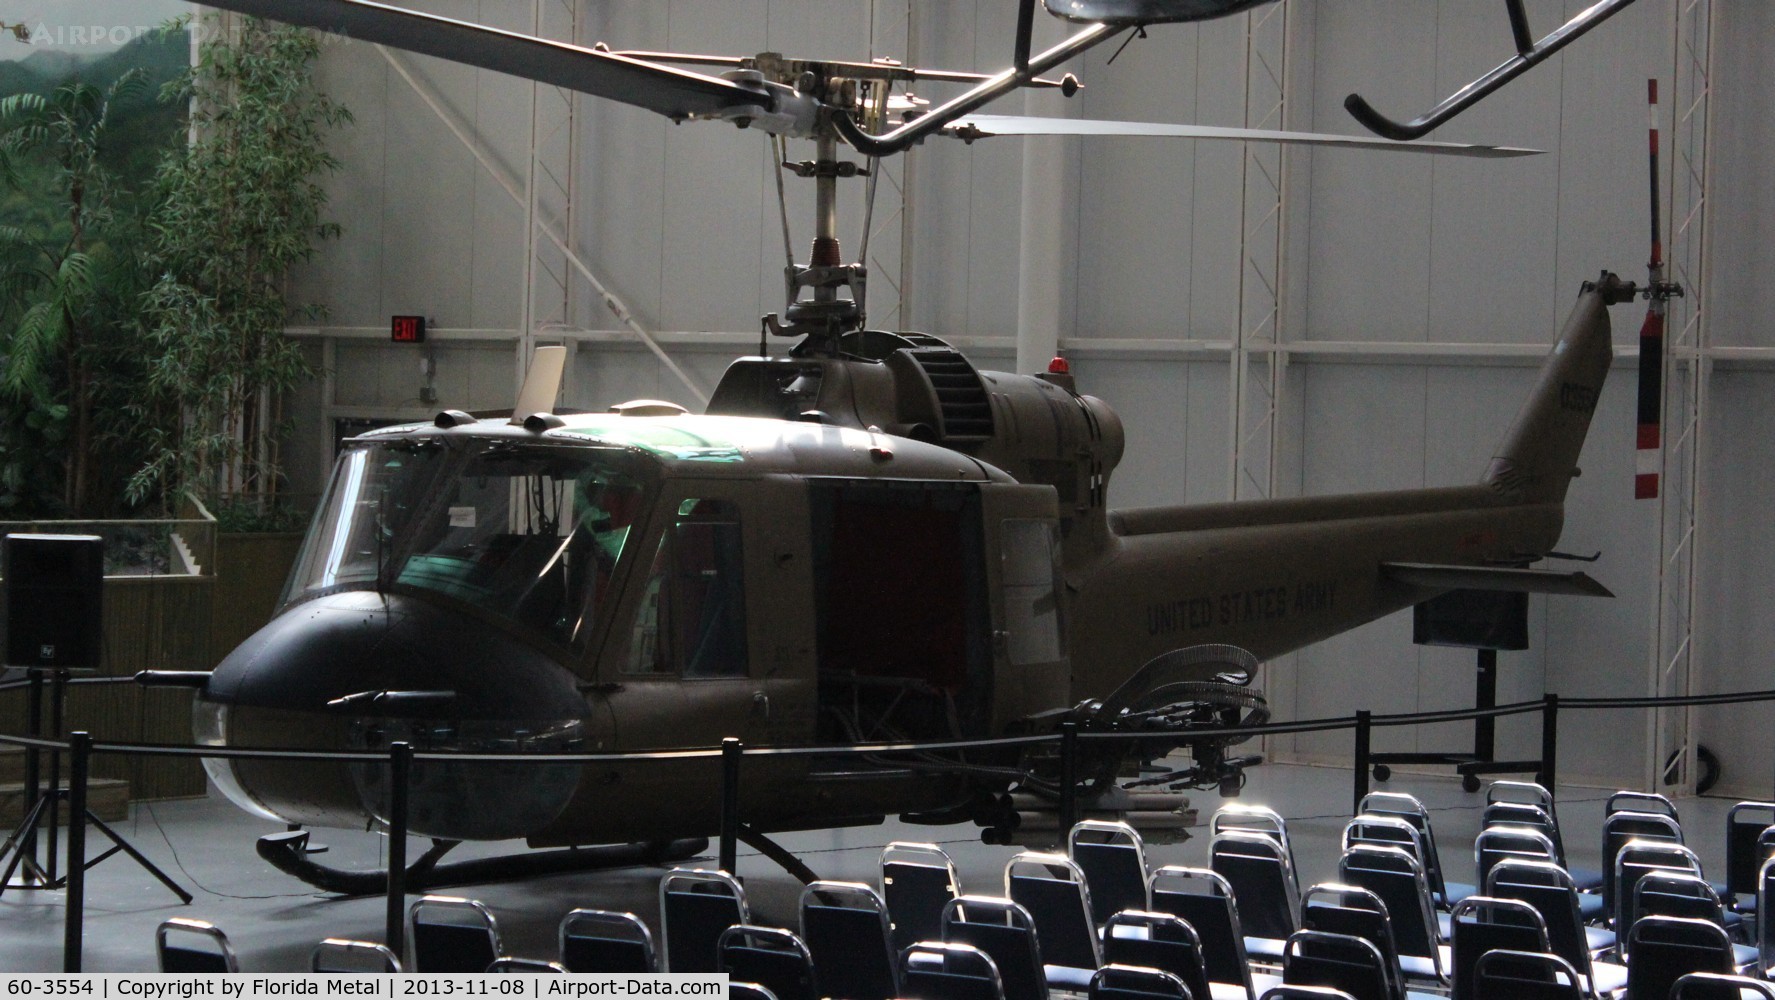 60-3554, 1960 Bell UH-1B Iroquois C/N 200, UH-1B Iroquois at the Army Aviation Museum